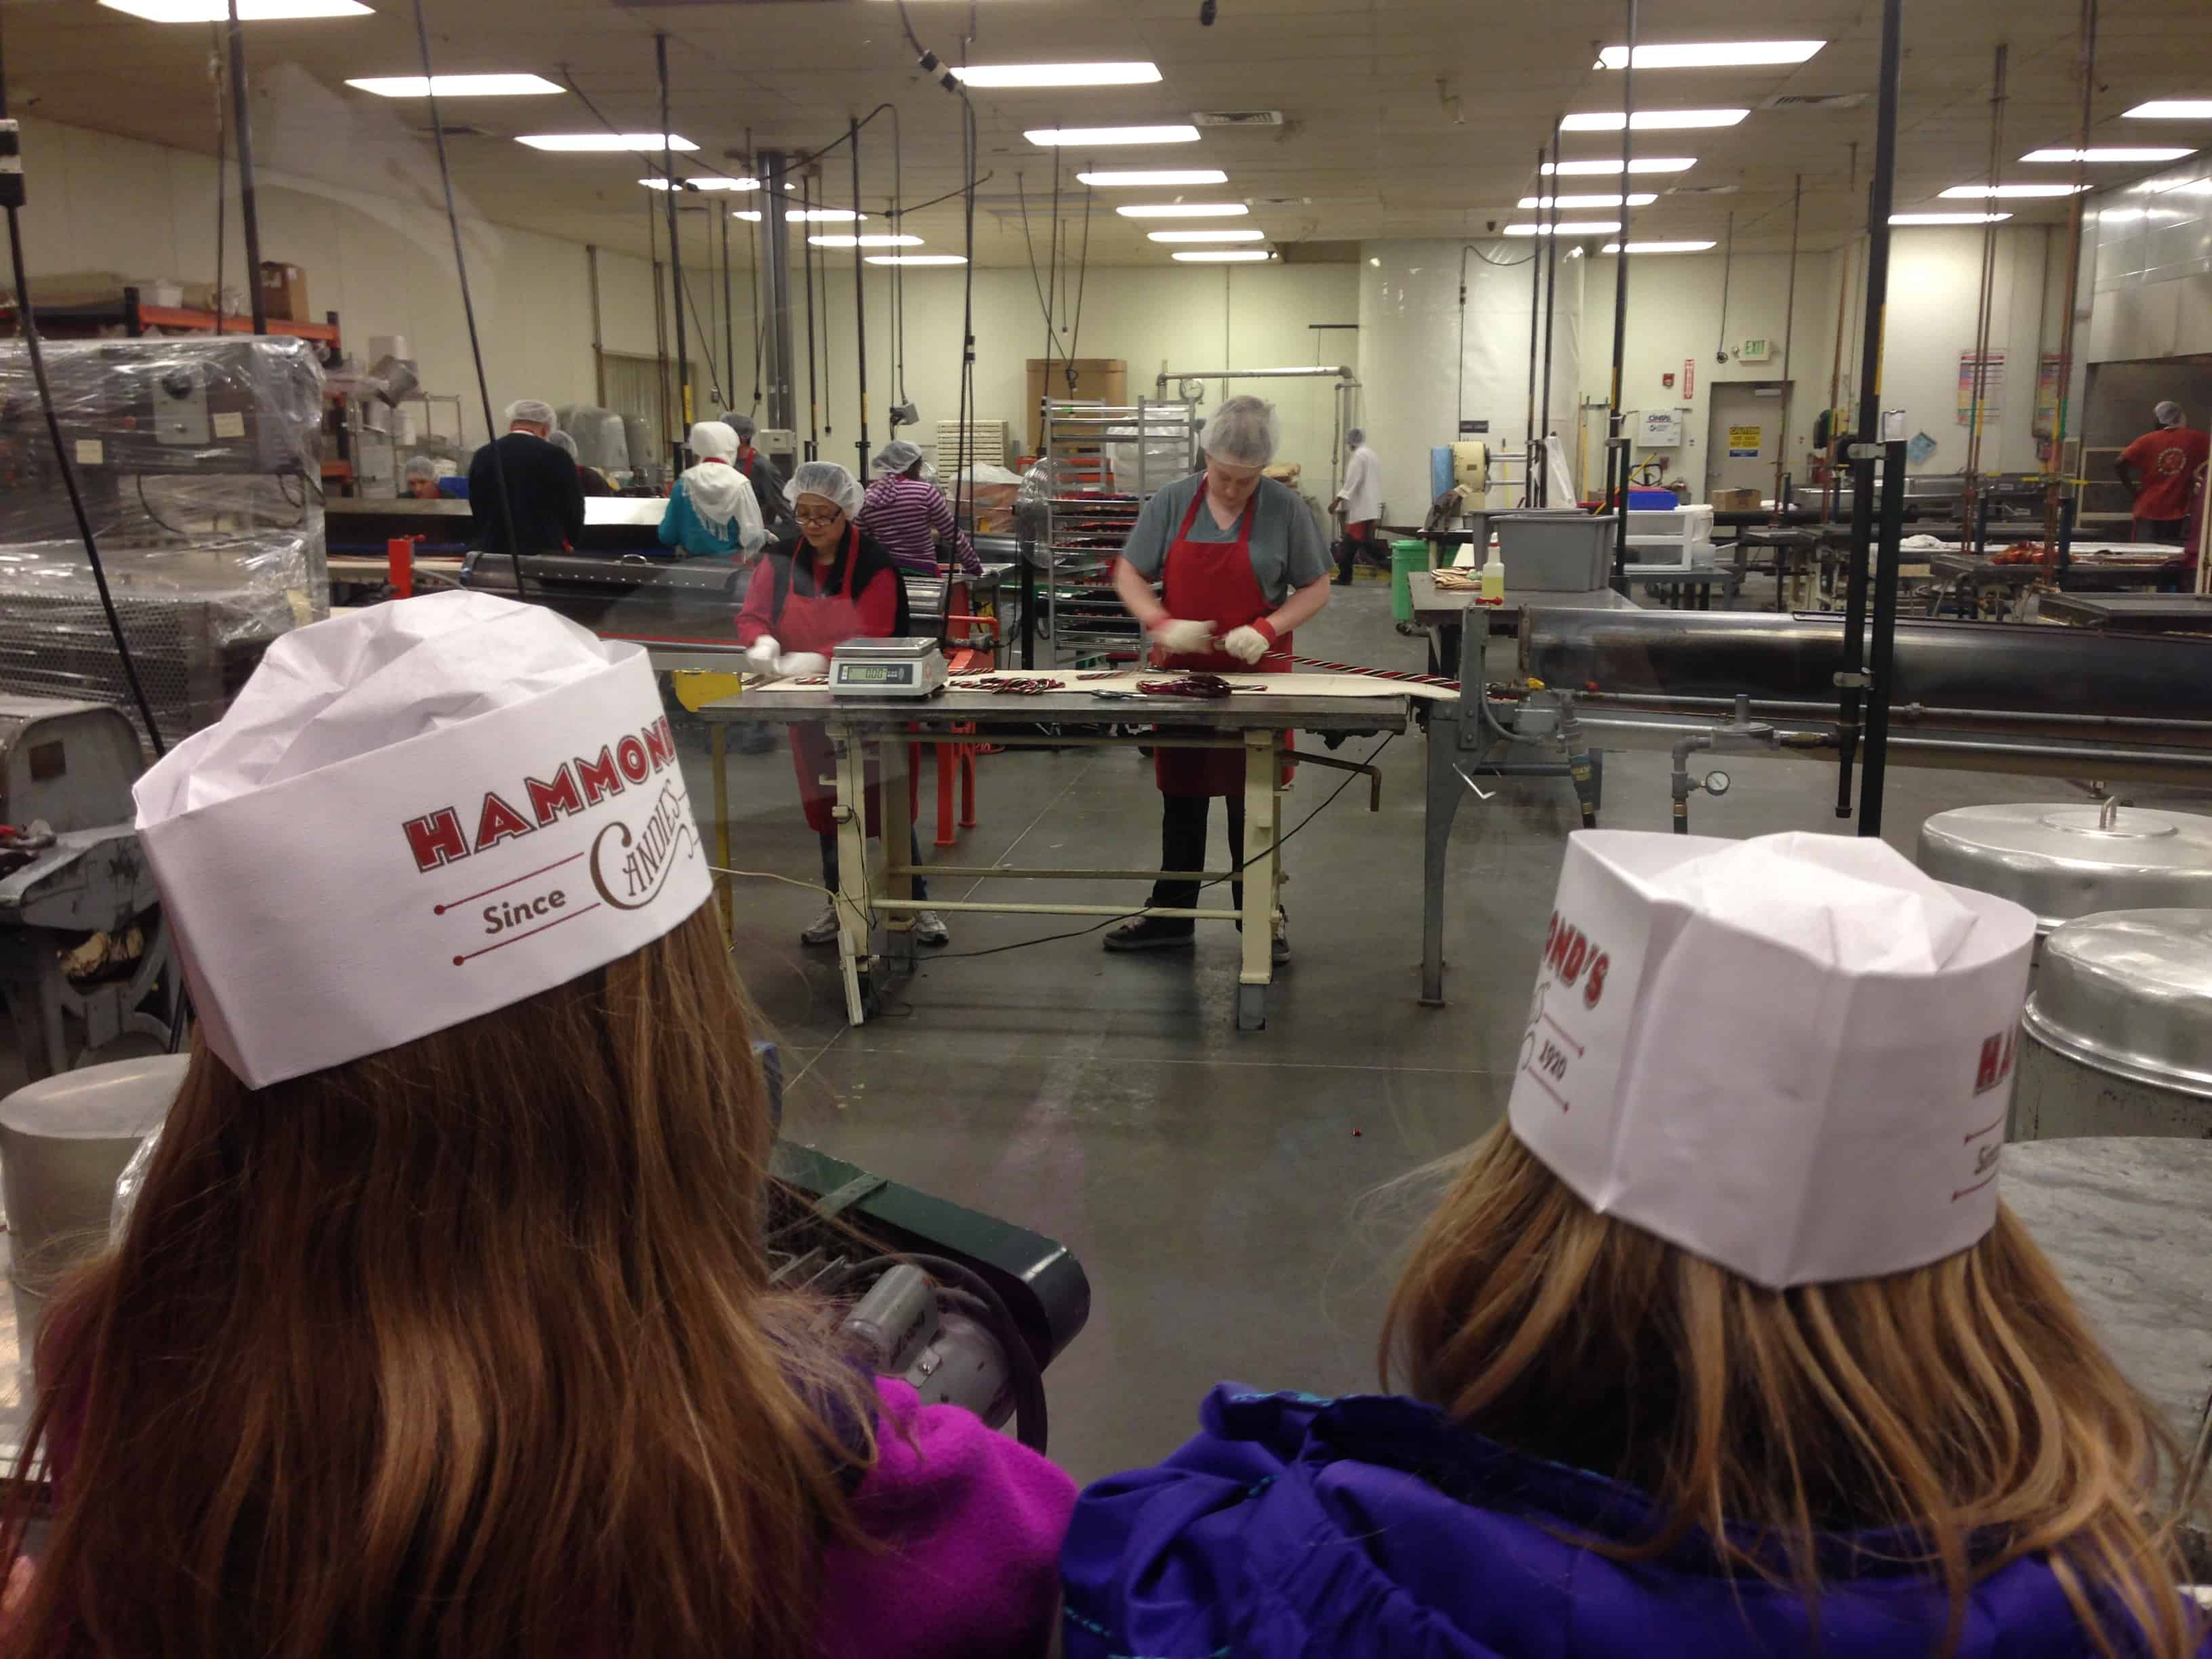 Free tour at Hammonds Candy, learning the art of candy making